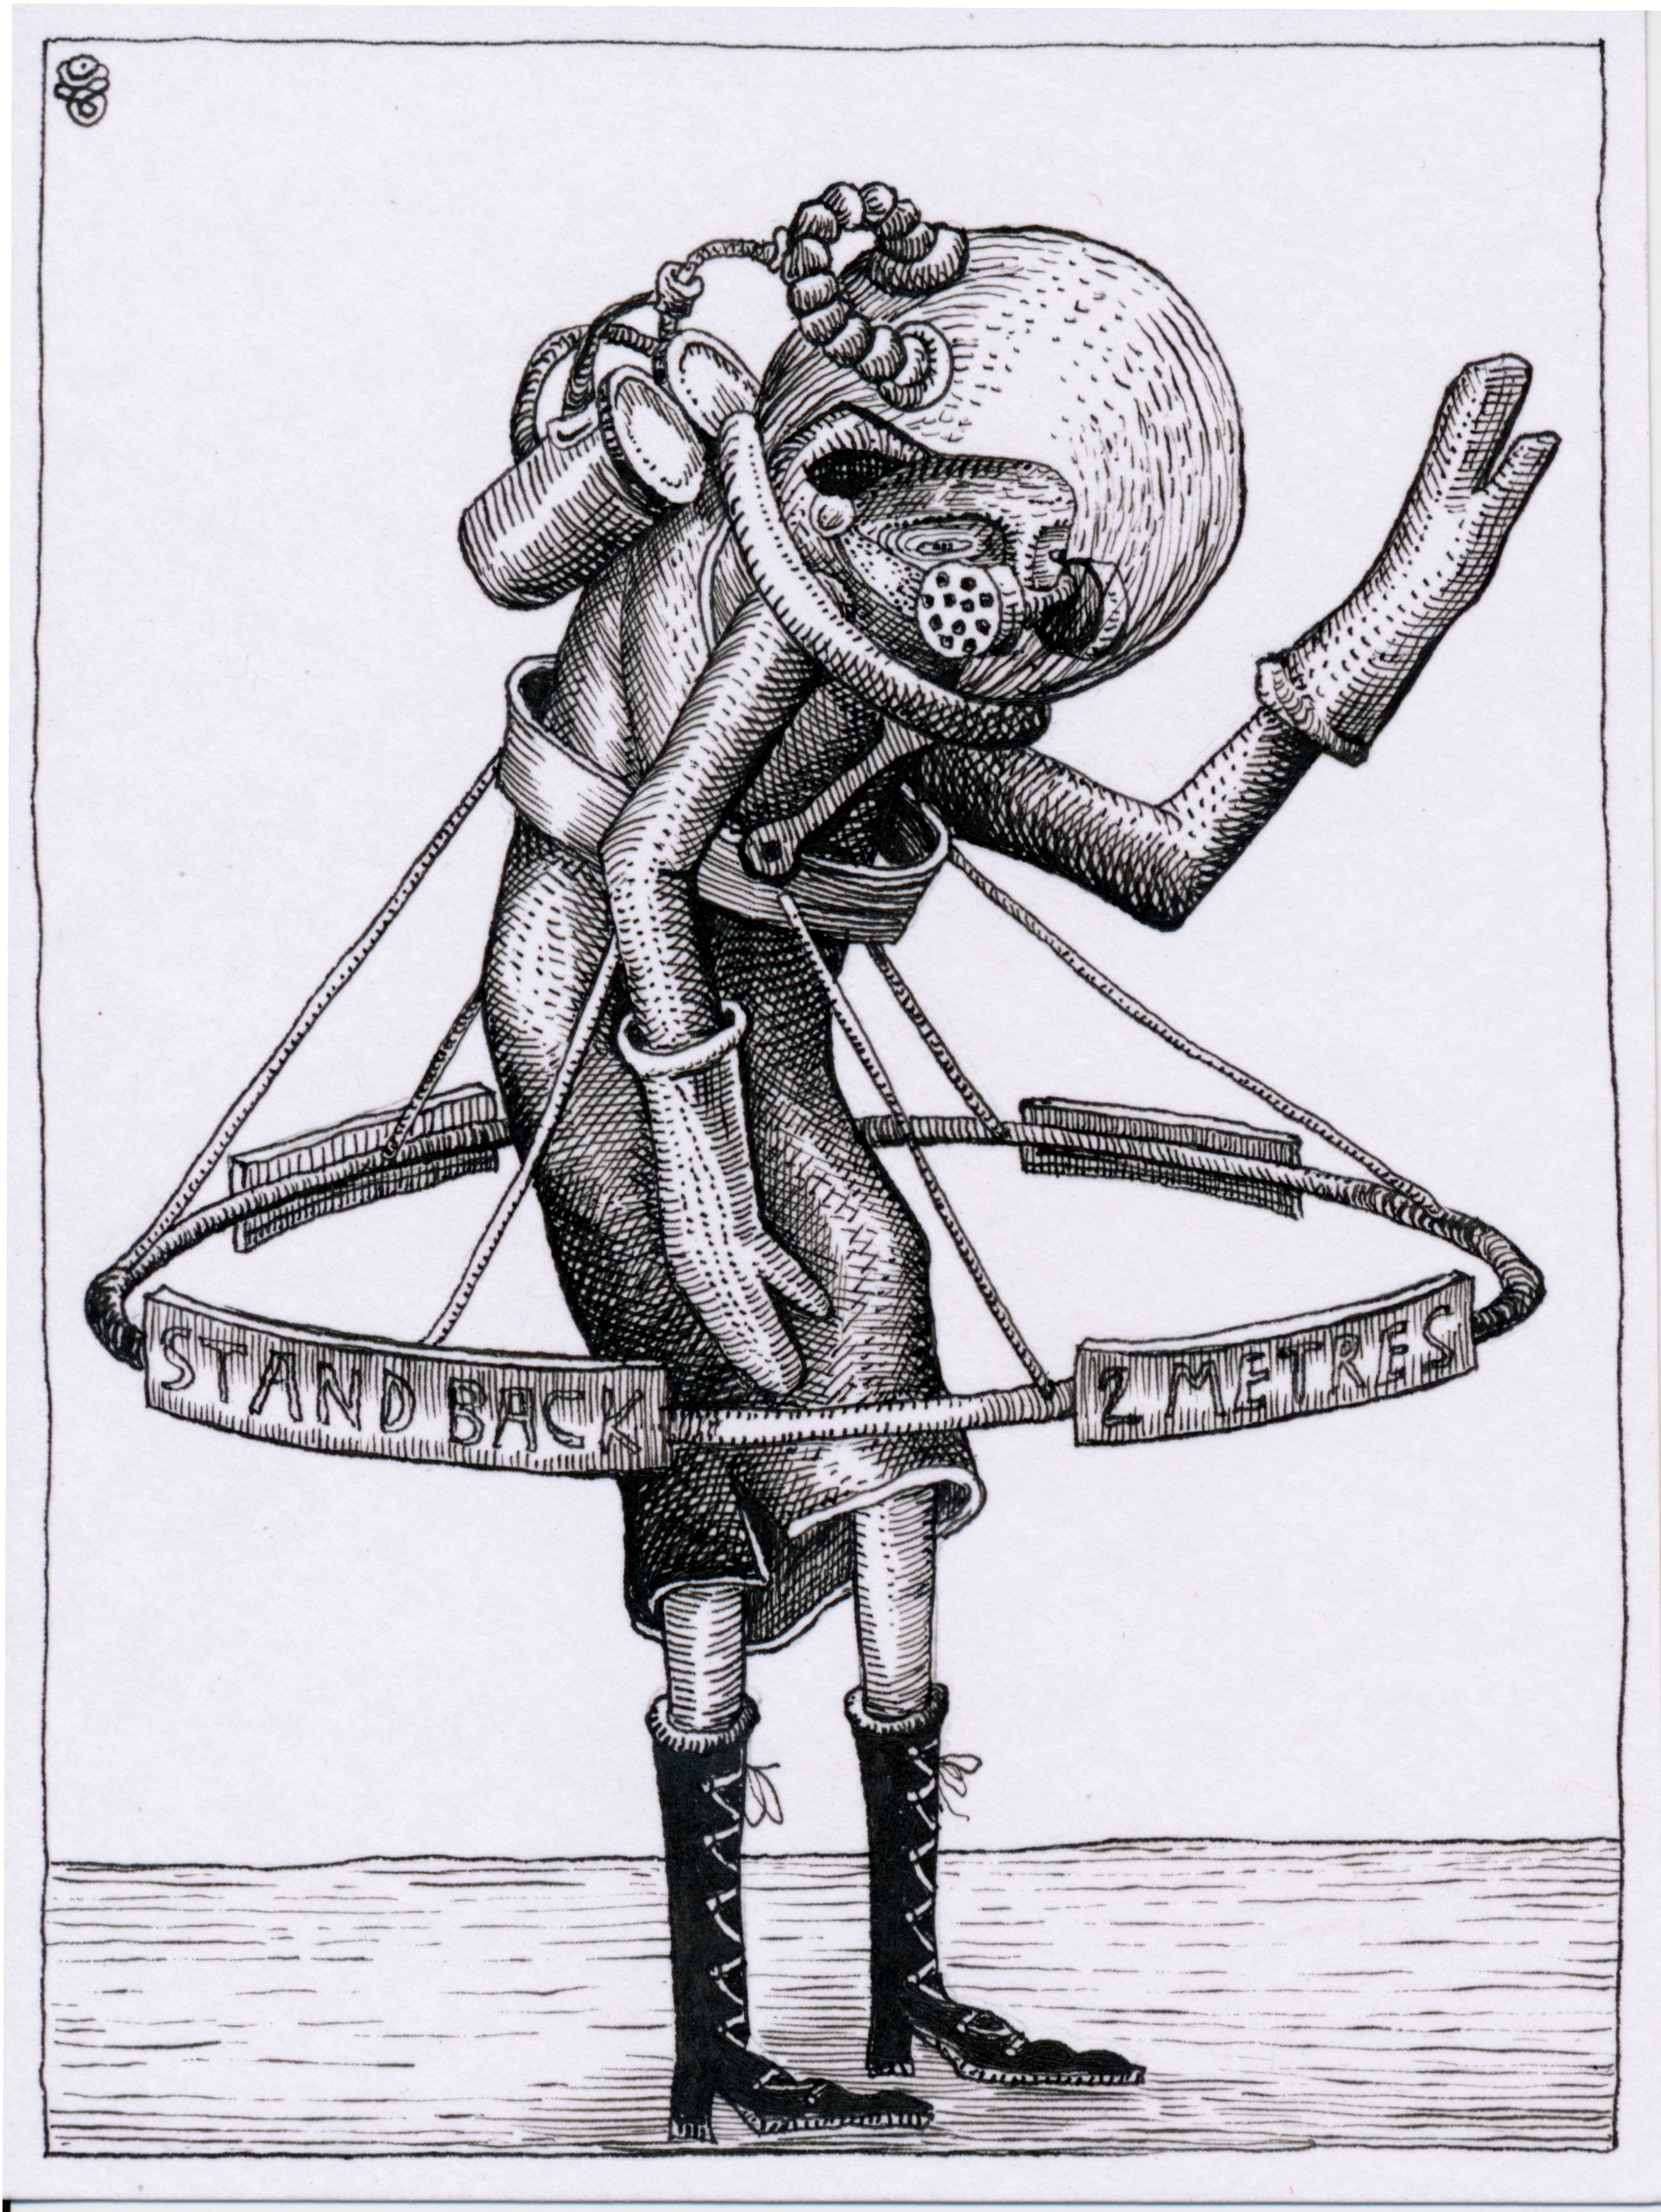 A pen and ink drawing of a human-like figure wearing a hula hoop suspended from their waist with the words "stand back" and "2 metres" written on. They are wearing oven gloves and a a astronaut-style helmet.  